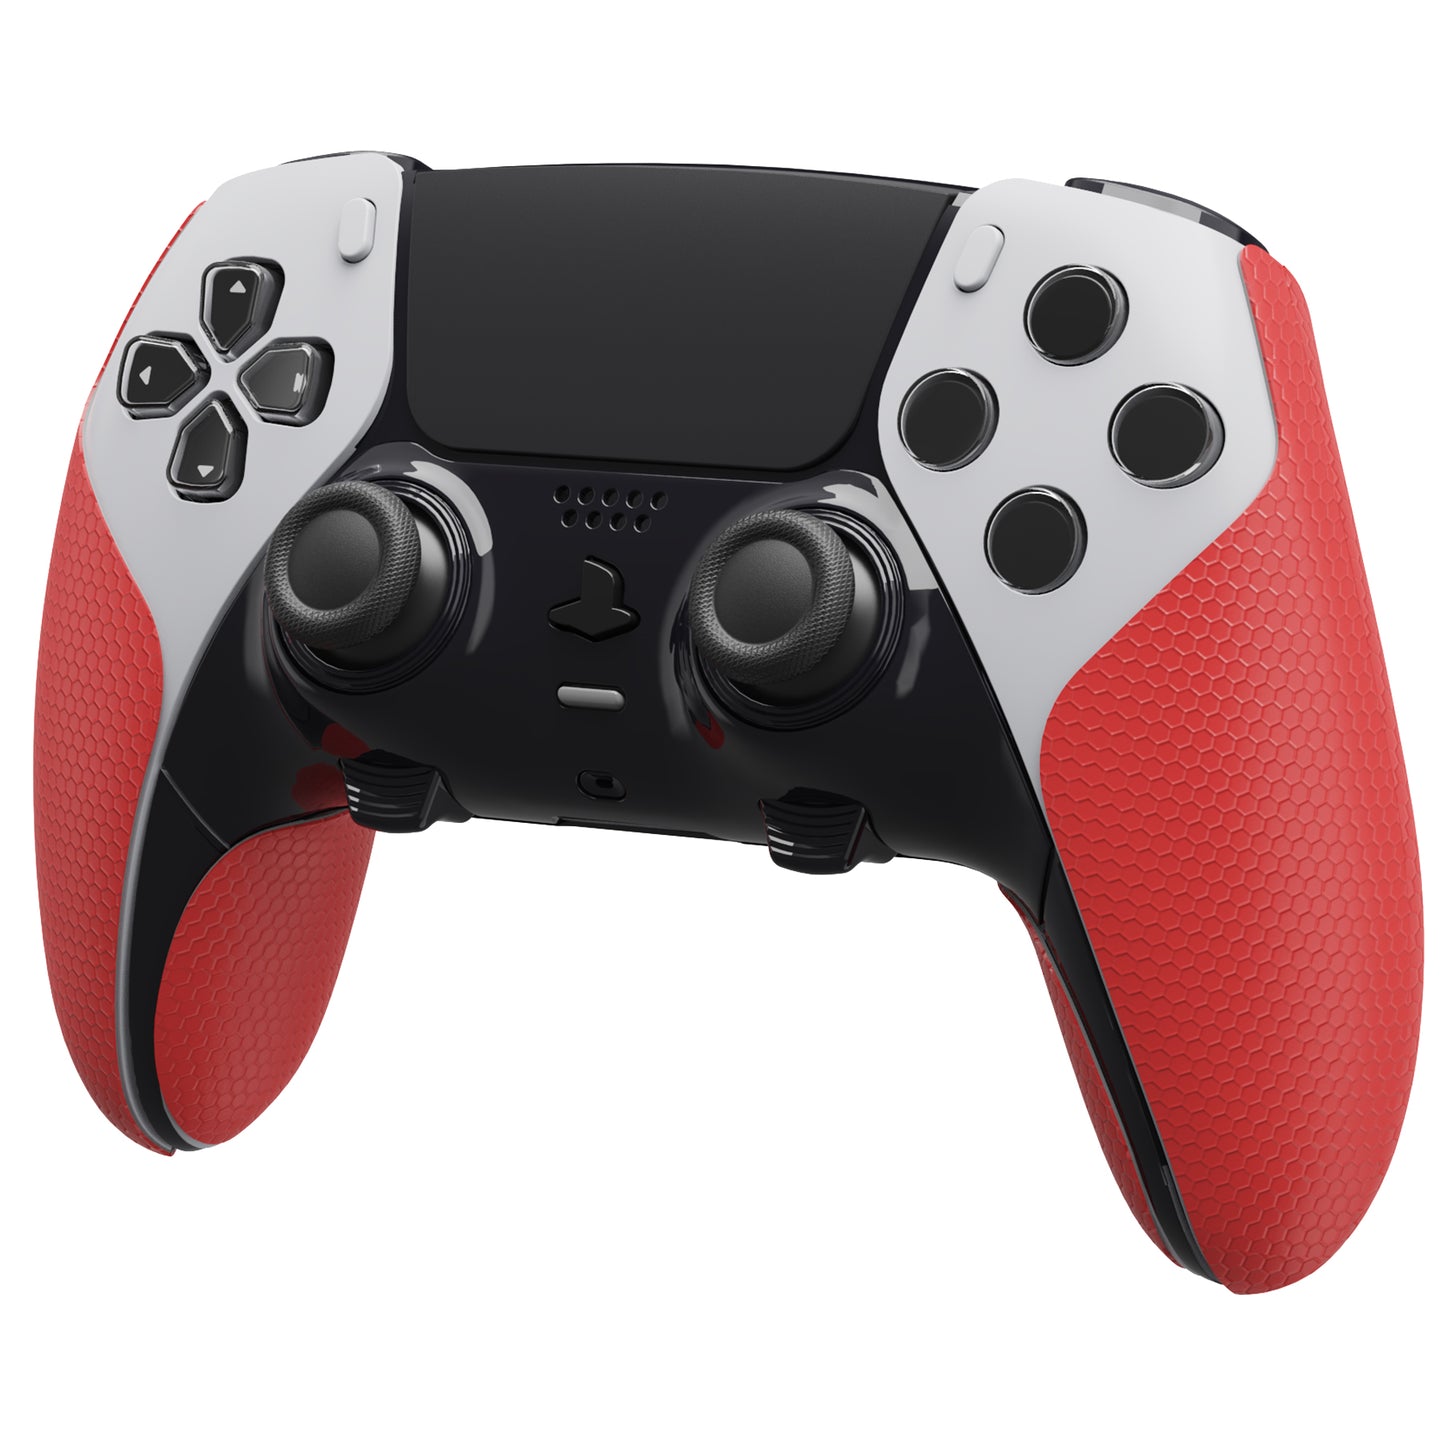 PlayVital Anti-Skid Sweat-Absorbent Controller Grip for ps5 Edge Wireless Controller, Professional Textured Soft PU Handle Grips Anti Sweat Protector for ps5 Edge Controller - Red - PFPJ147